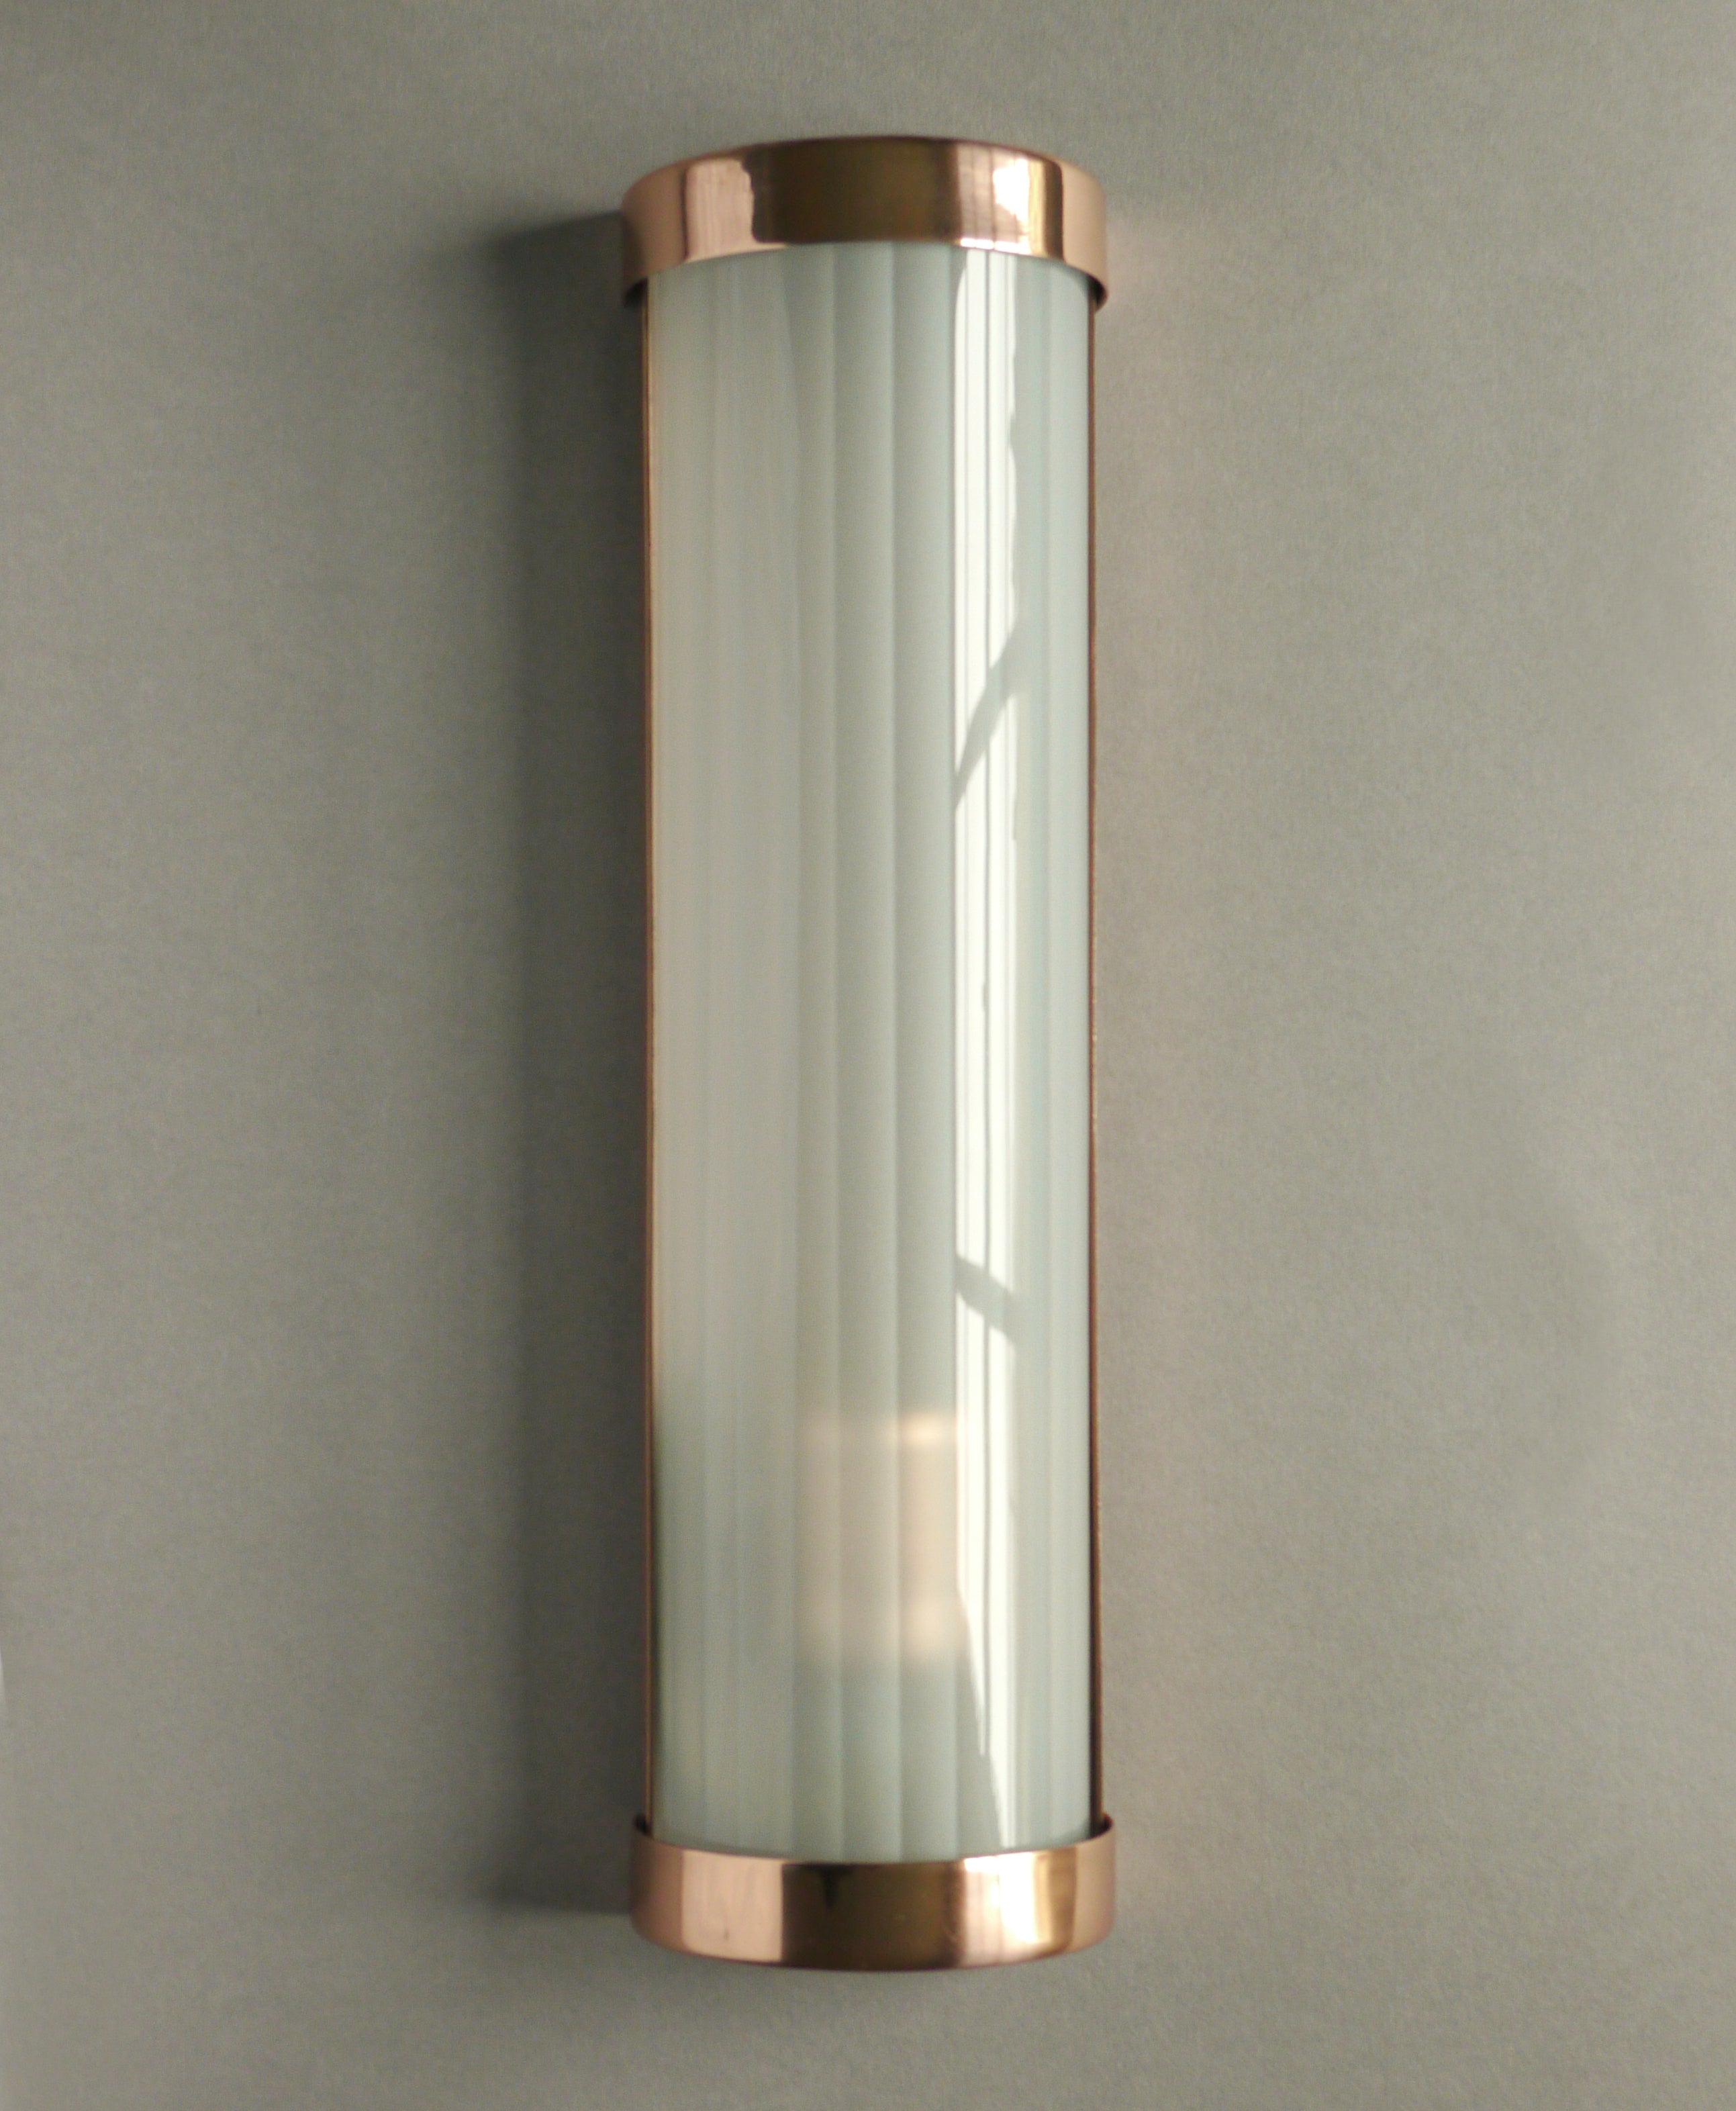 Deco Style Wall Light, Copper, for Bathroom